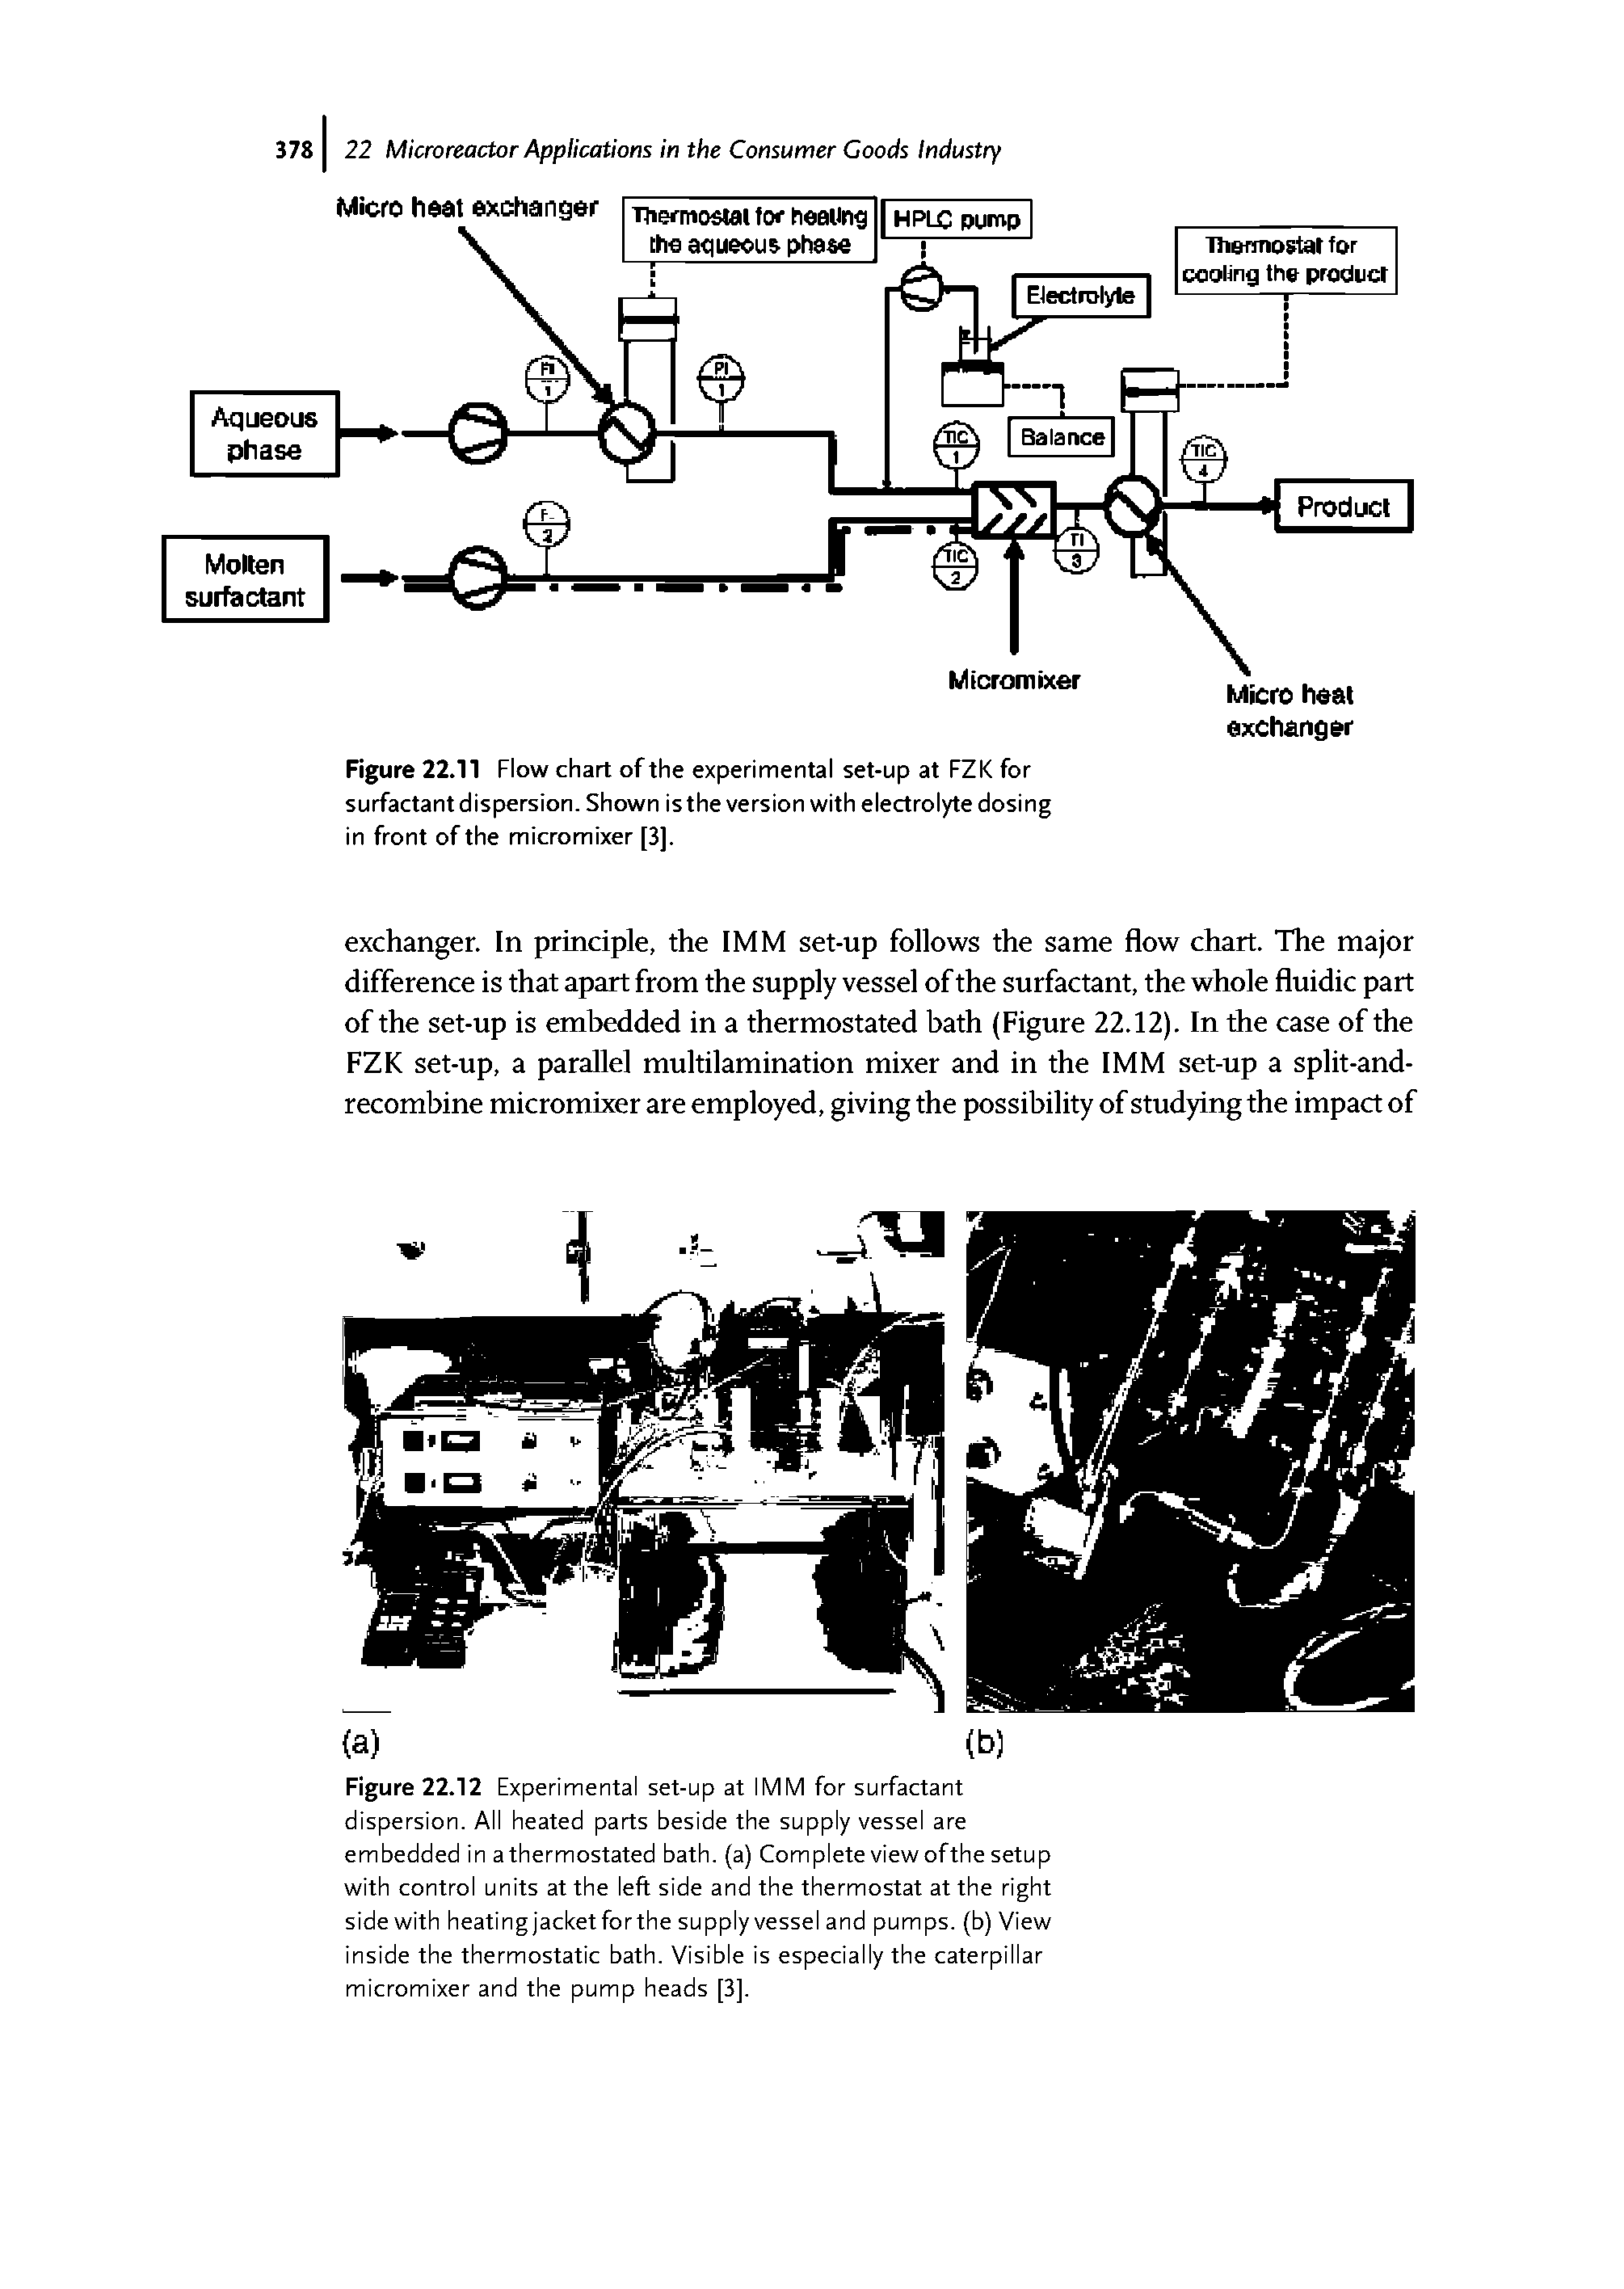 Figure 22.12 Experimental set-up at IMM for surfactant dispersion. All heated parts beside the supply vessel are embedded in a thermostated bath, (a) Complete view of the setup with control units at the left side and the thermostat at the right side with heatingjacketforthe supply vessel and pumps, (b) View inside the thermostatic bath. Visible is especially the caterpillar micromixer and the pump heads [3].